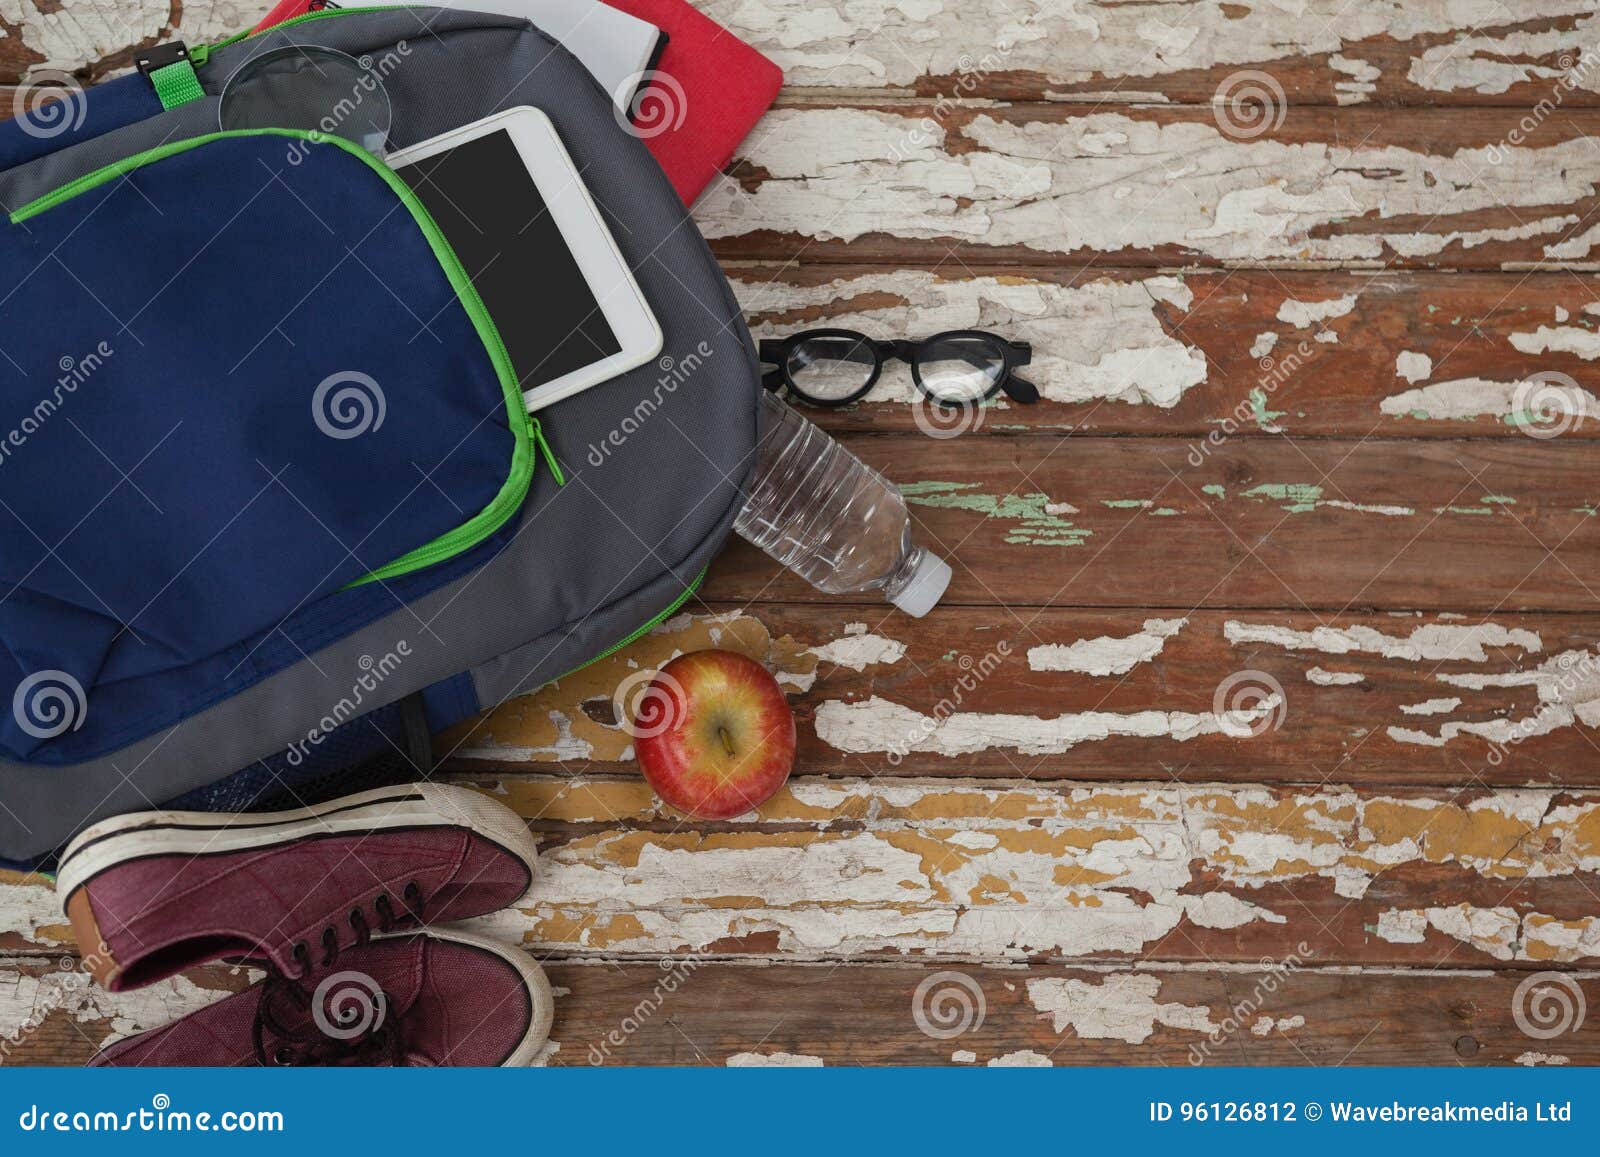 bagpack, water bottle, apple, digital tablet, shoes and spectacle